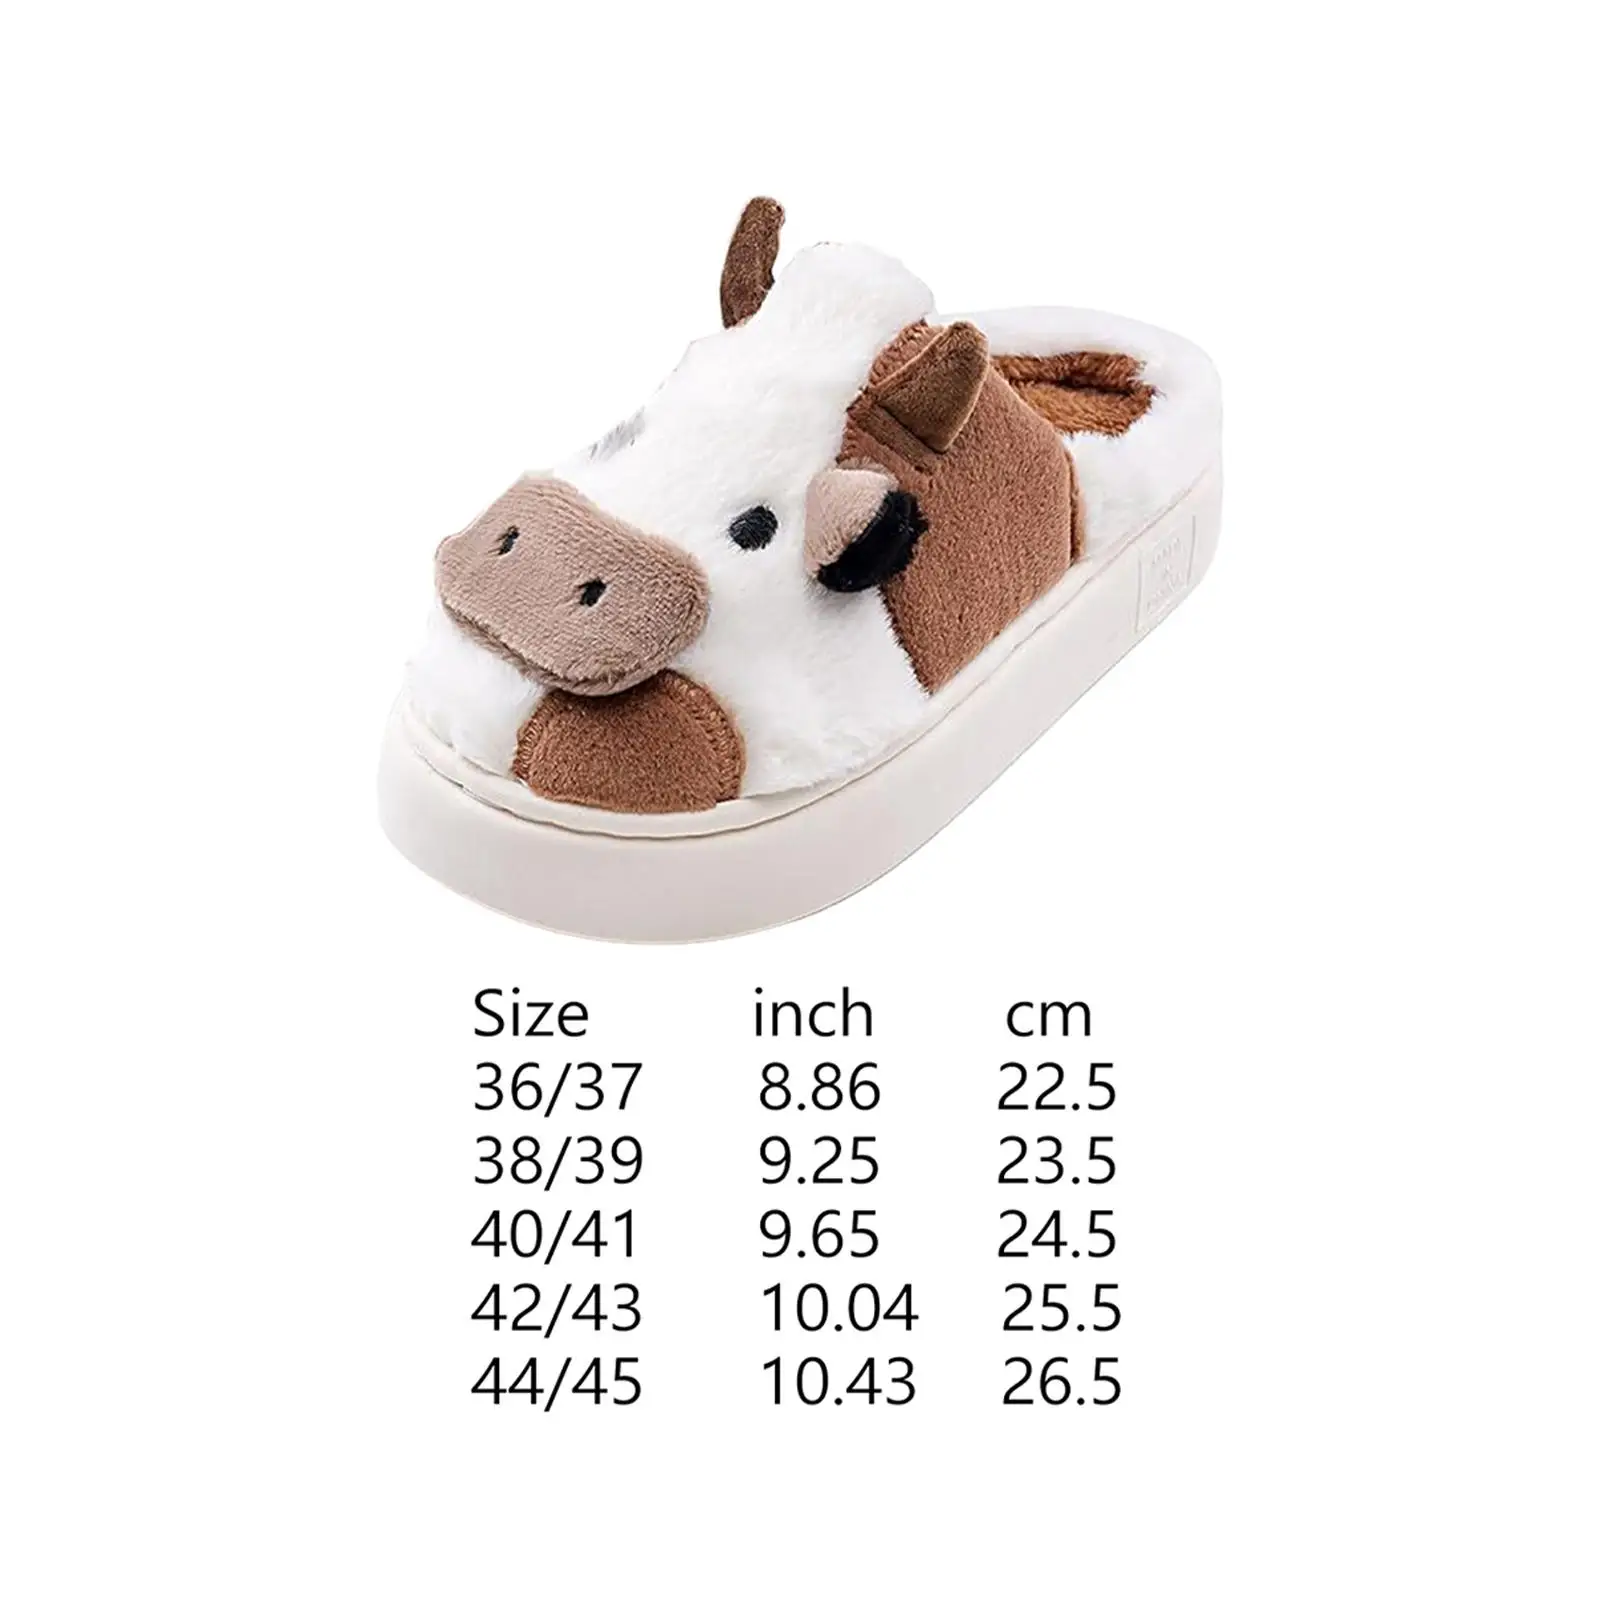 Winter Cow Plush Slippers Novelty Portable Creative Adorable Animal Indoor Shoes Winter Footwear for House Home Dorm Travel Men